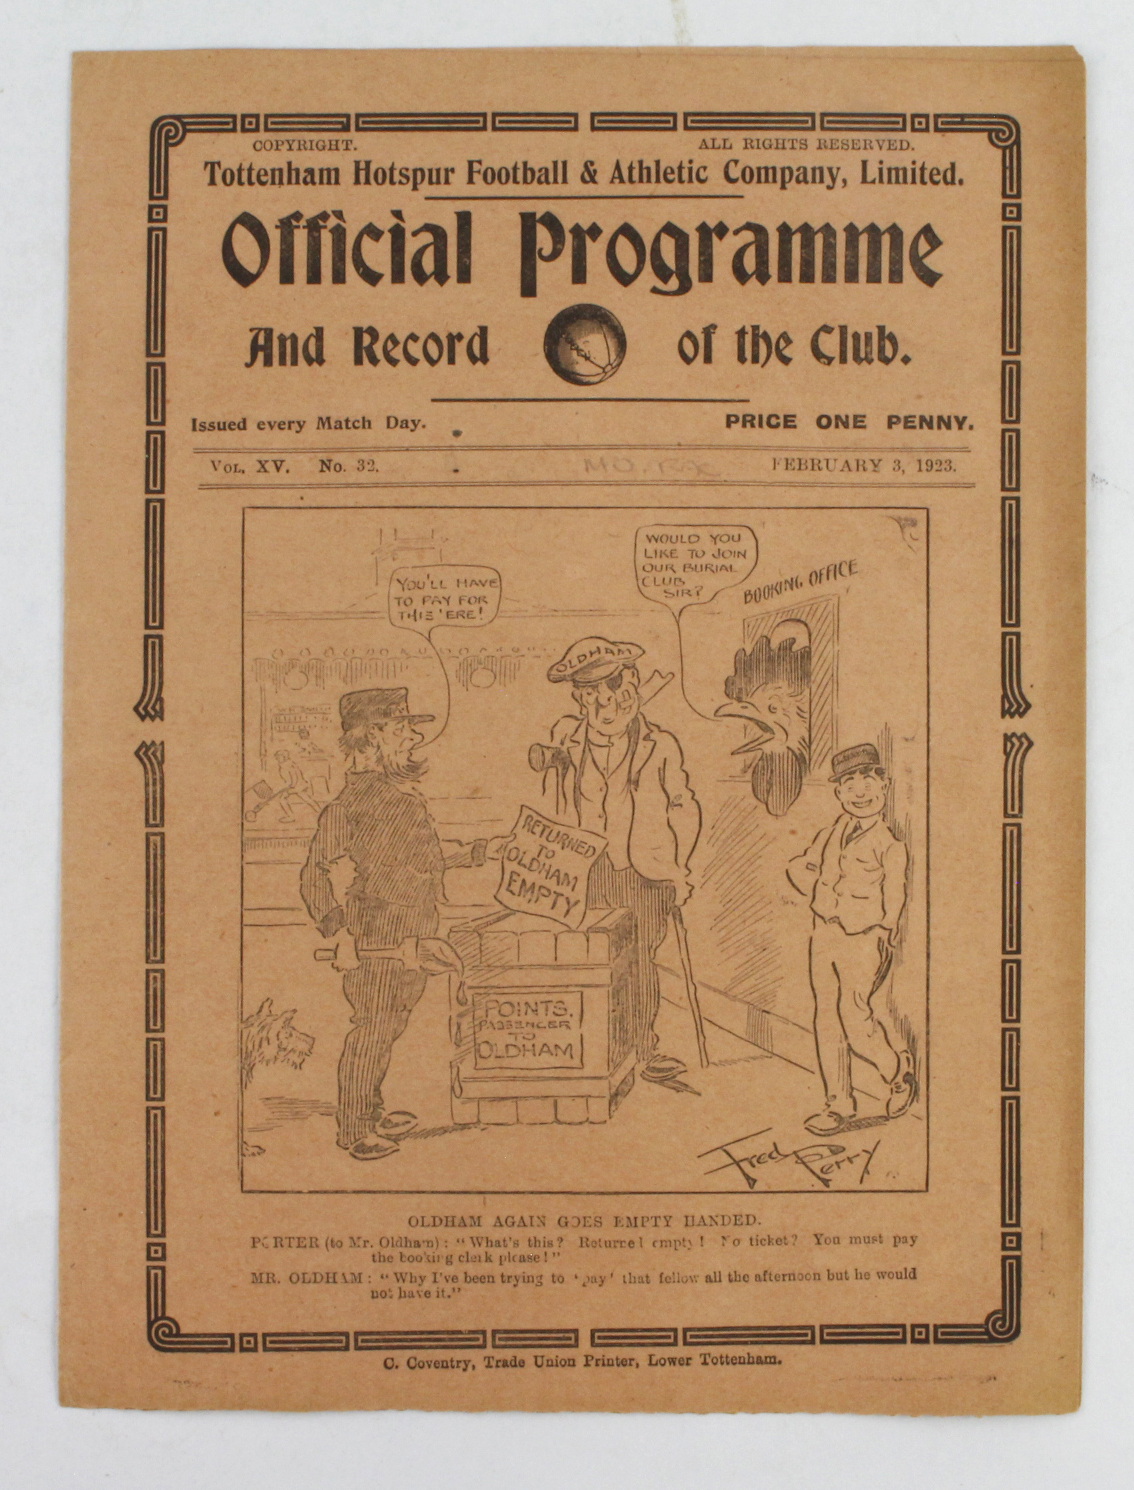 Tottenham v Manchester United FA Cup 2nd Round 3rd February 1923 programme